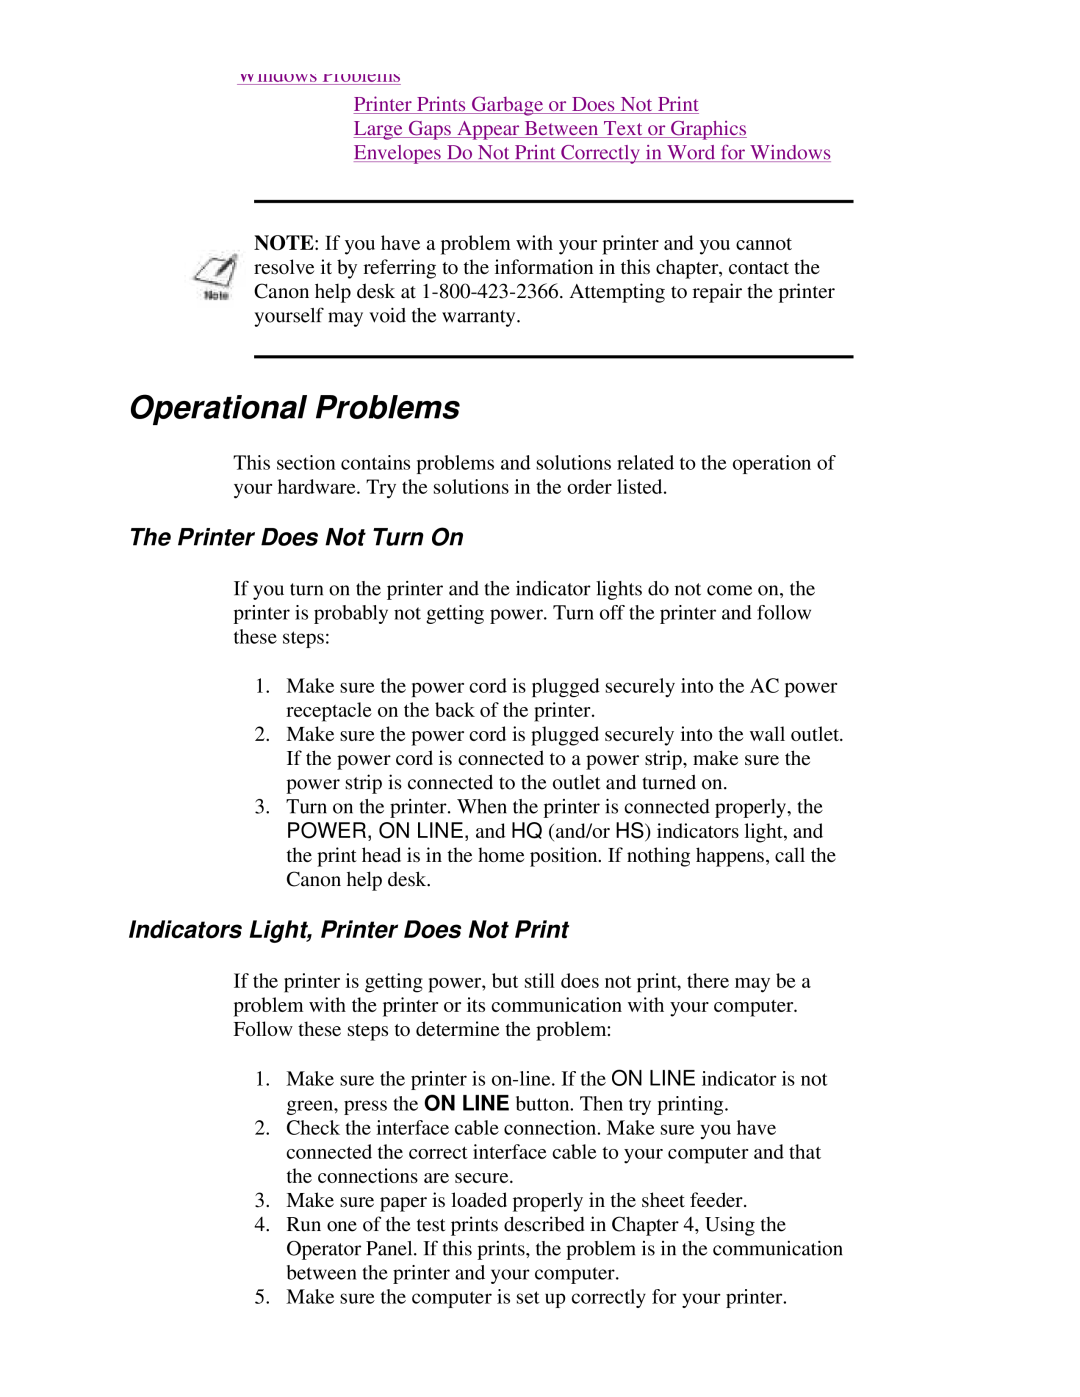 Canon BJ-230 user manual Operational Problems, The Printer Does Not Turn On, Indicators Light, Printer Does Not Print 